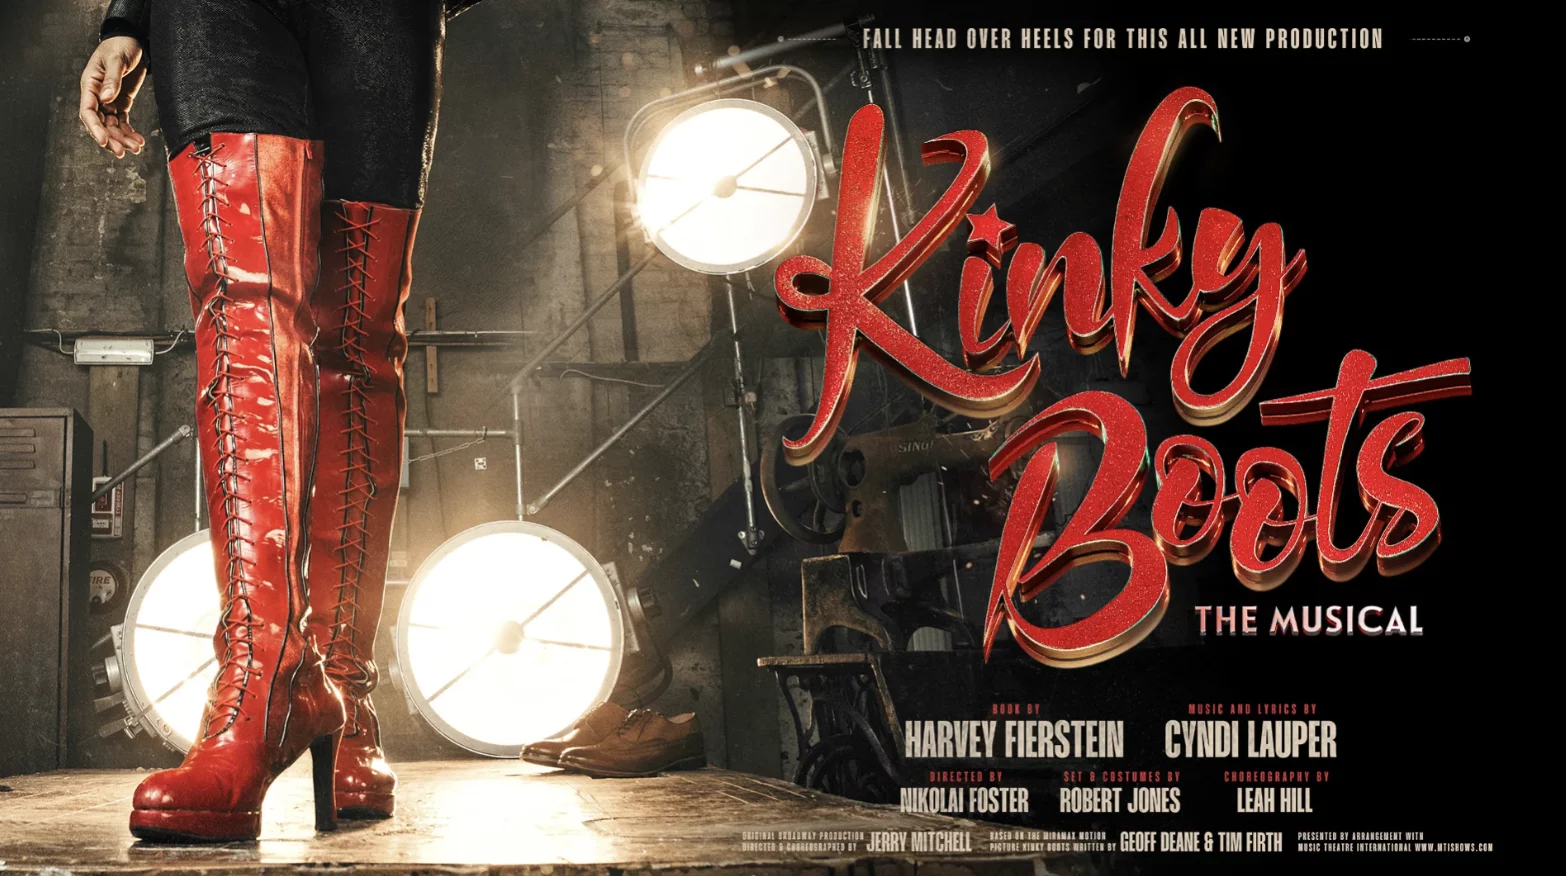 Johannes Radebe & Dan Partridge to star in Kinky Boots The Musical UK tour